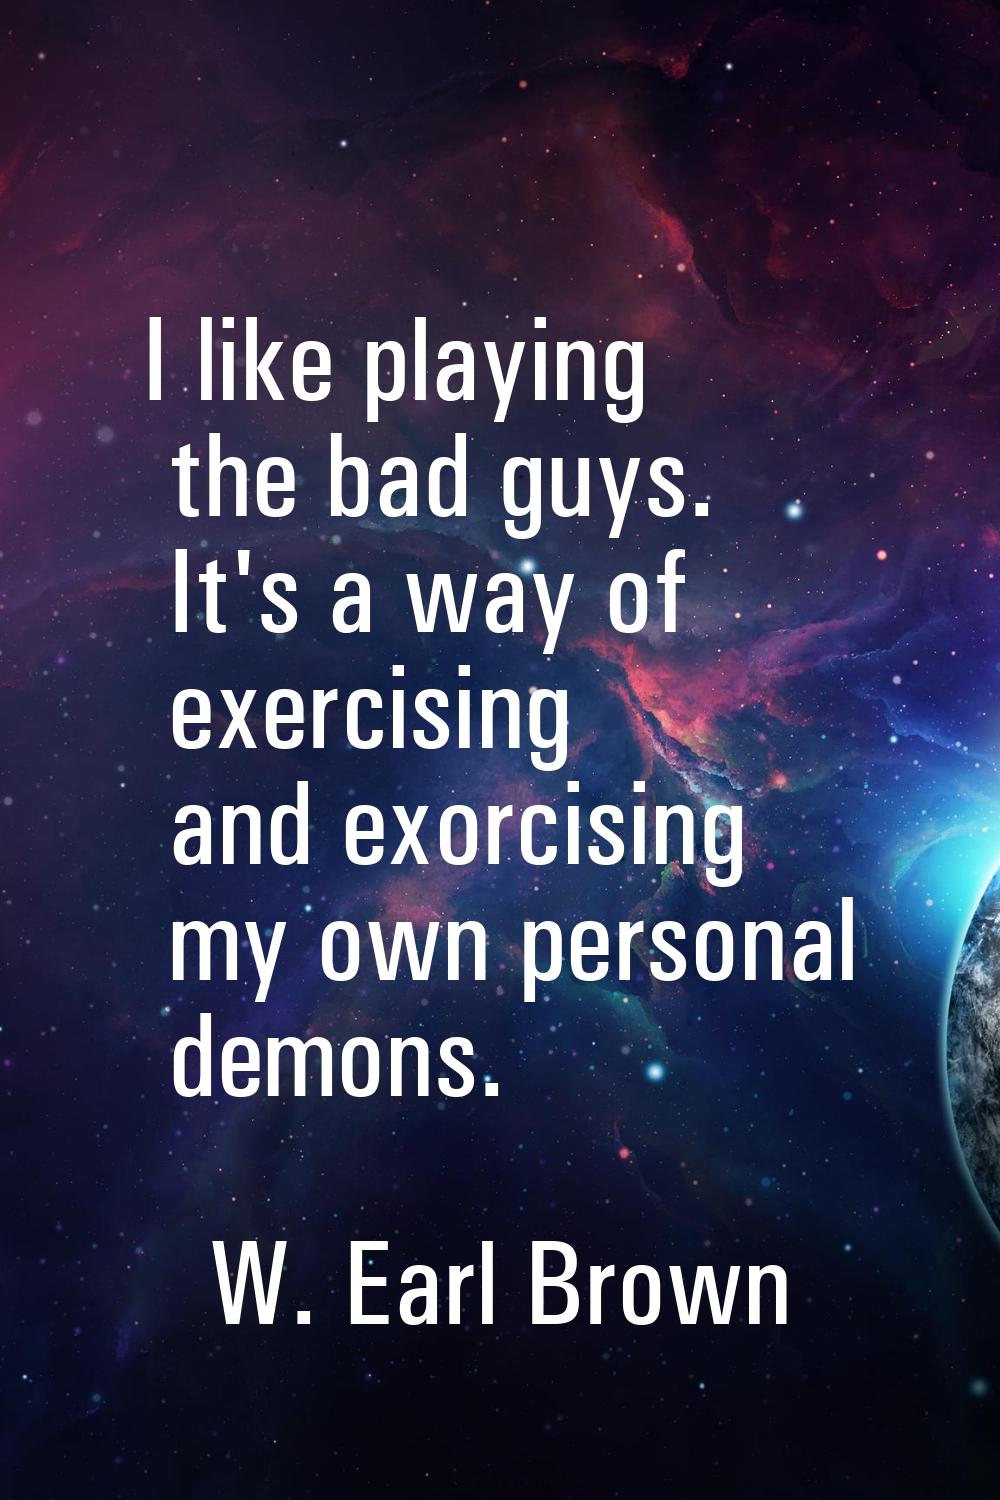 I like playing the bad guys. It's a way of exercising and exorcising my own personal demons.